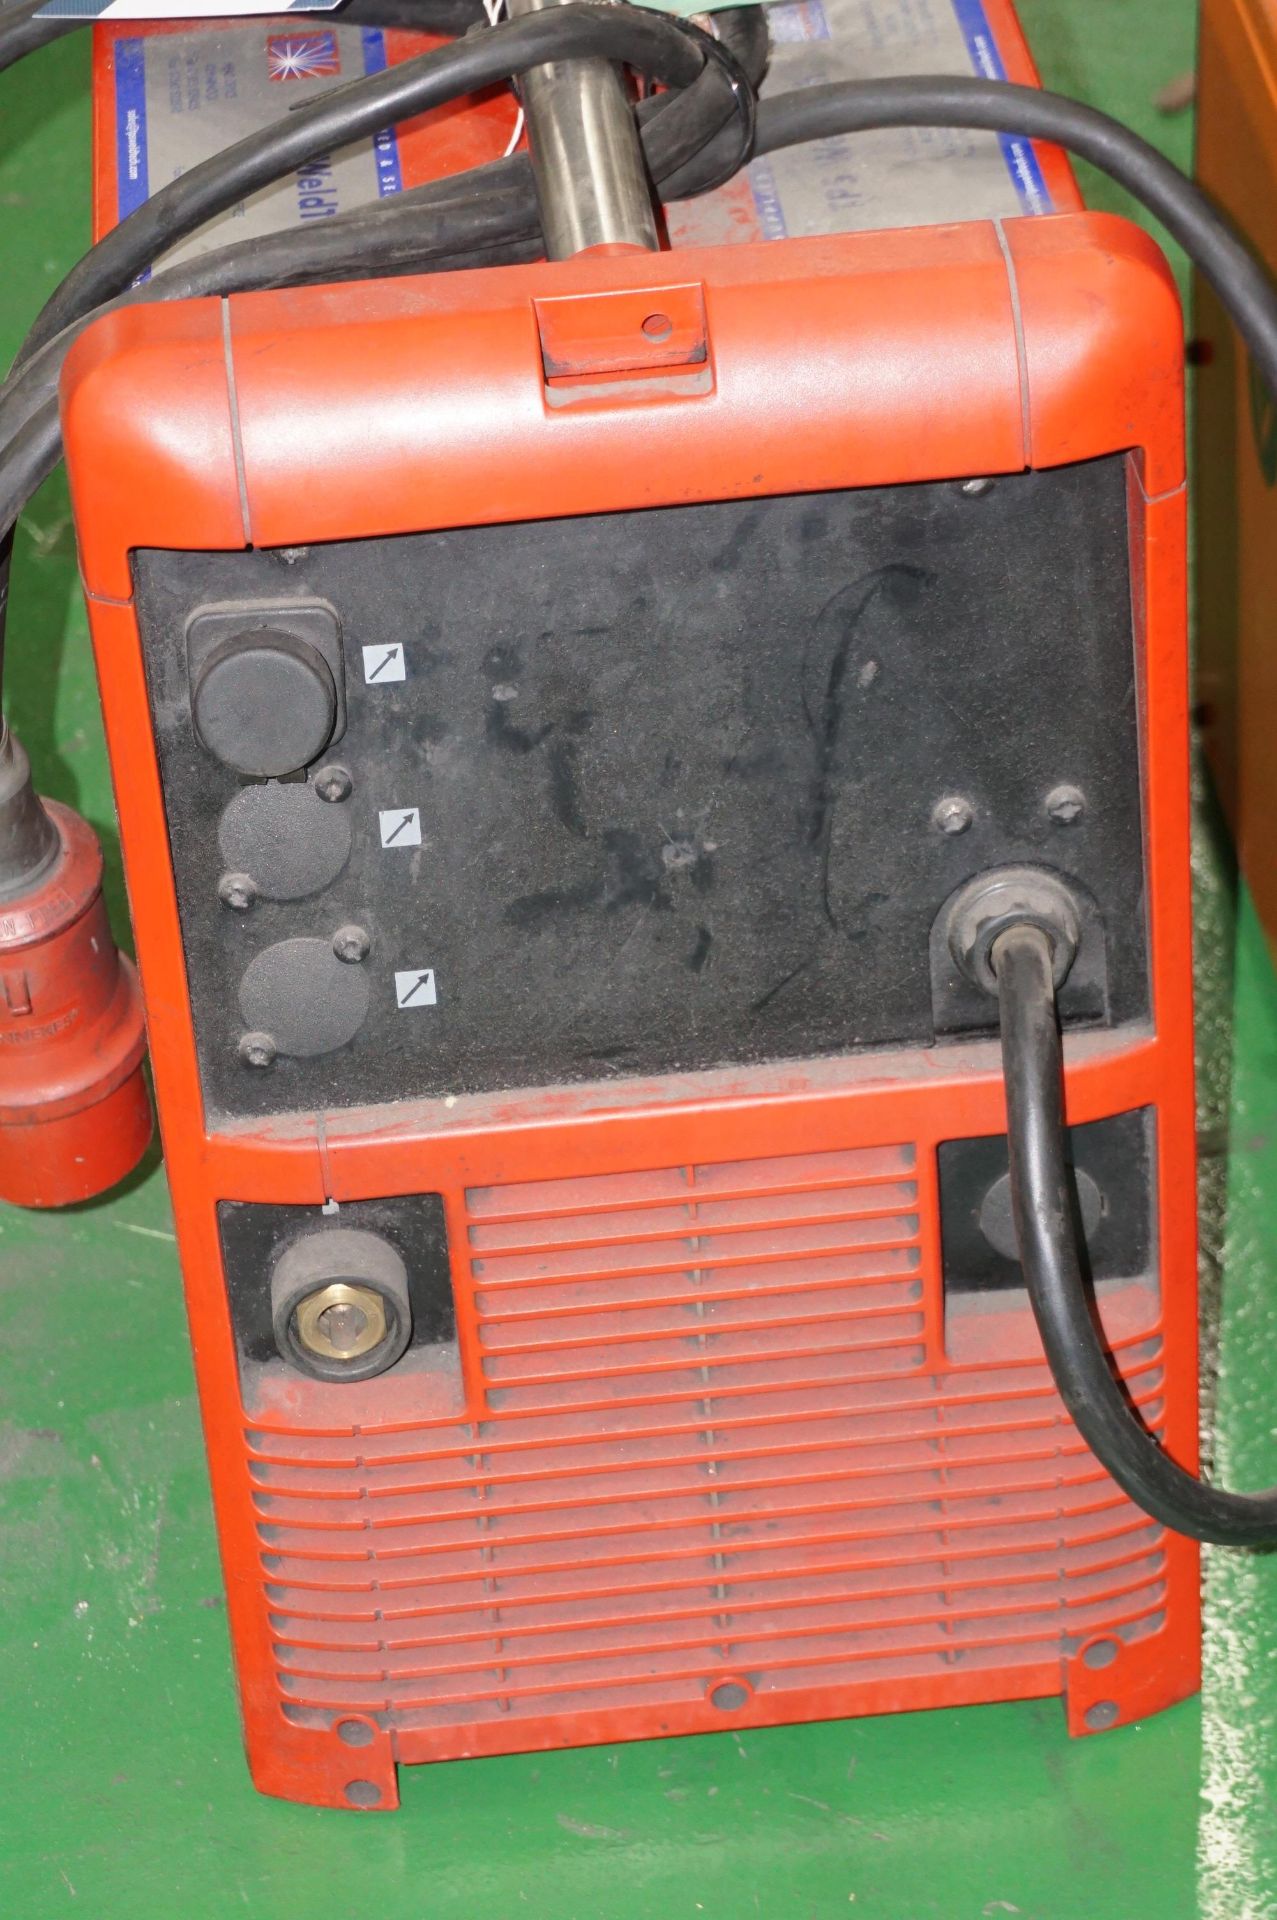 1 x Kemppi KempArc Pulse 350 MiG/MaG welder and 1 x TPS WeldTech TransSynergic 4000 MiG/MaG welder - Image 9 of 9